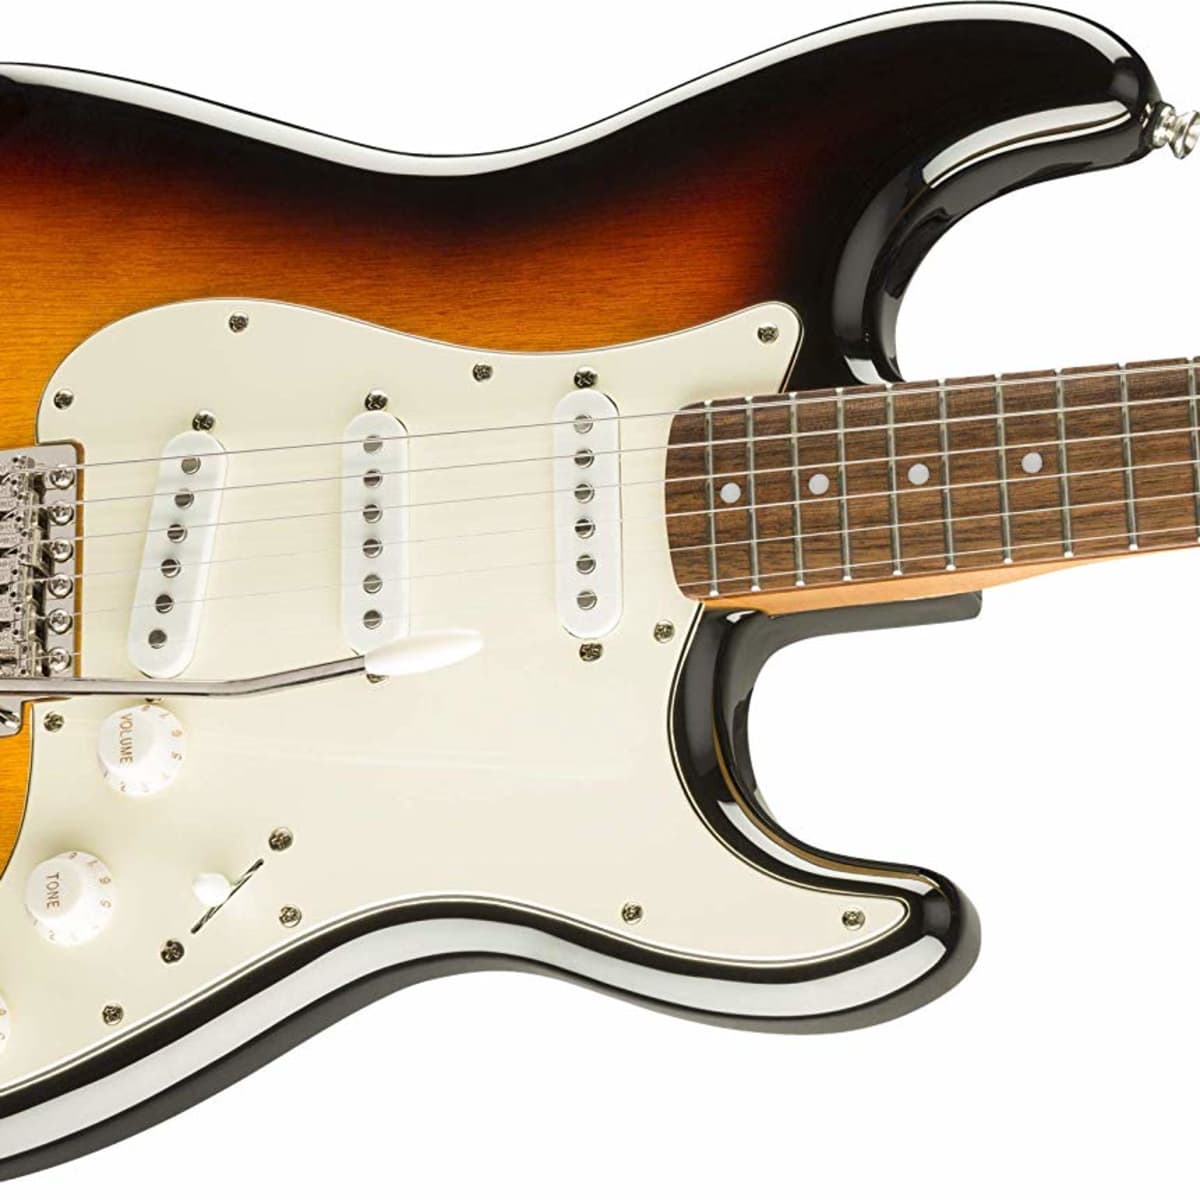 Squier Guitar Review: Is Squier by Fender a Good Brand? - Spinditty